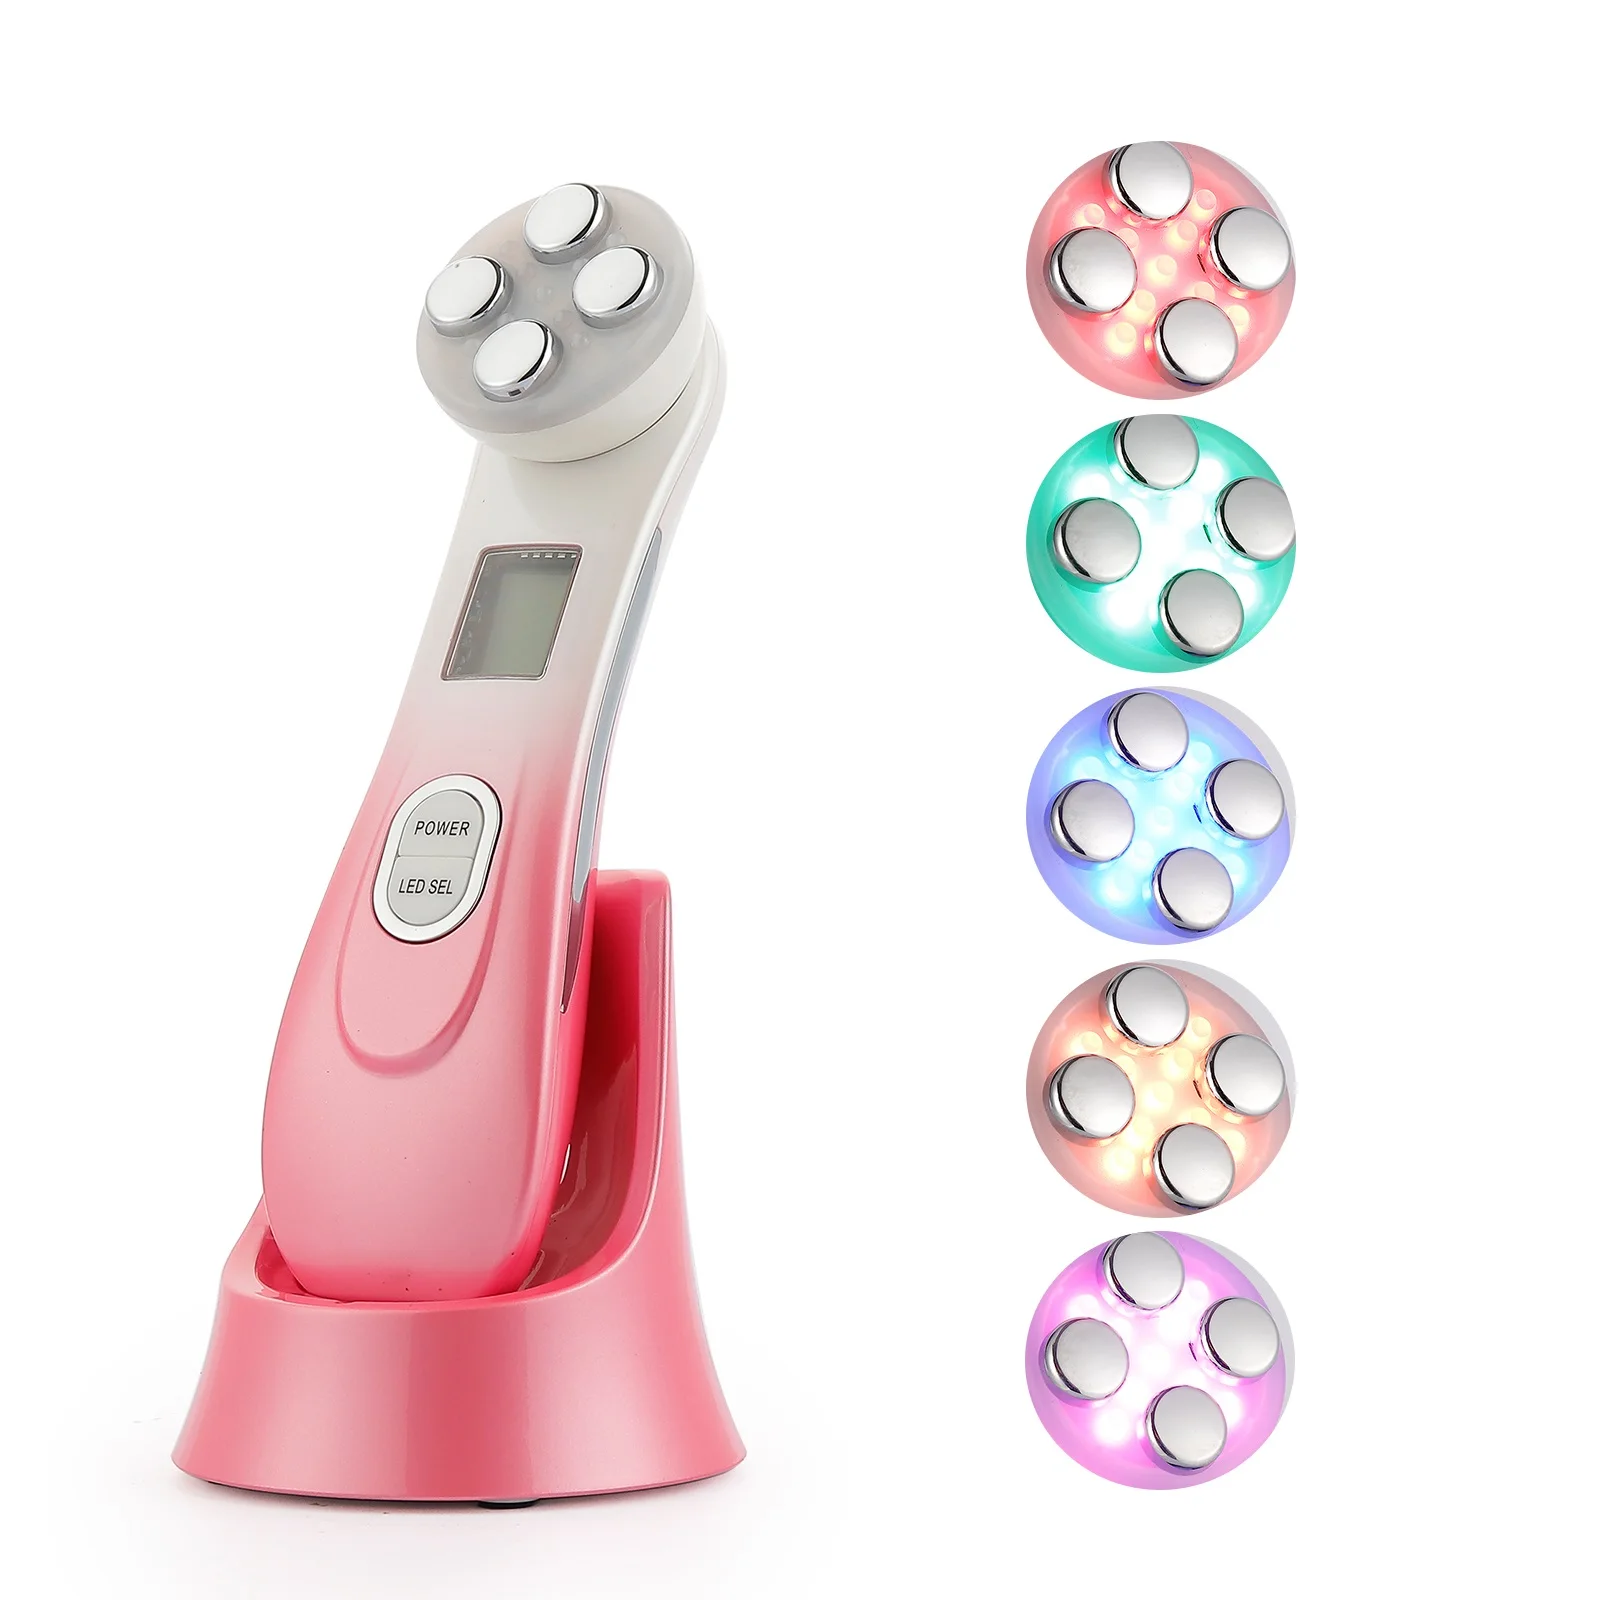 NOBOX-5in1 RF EMS Electroporation LED Photon Light Therapy Beauty Device Anti Aging Face Lifting Tightening Eye Facial Skin Care 9